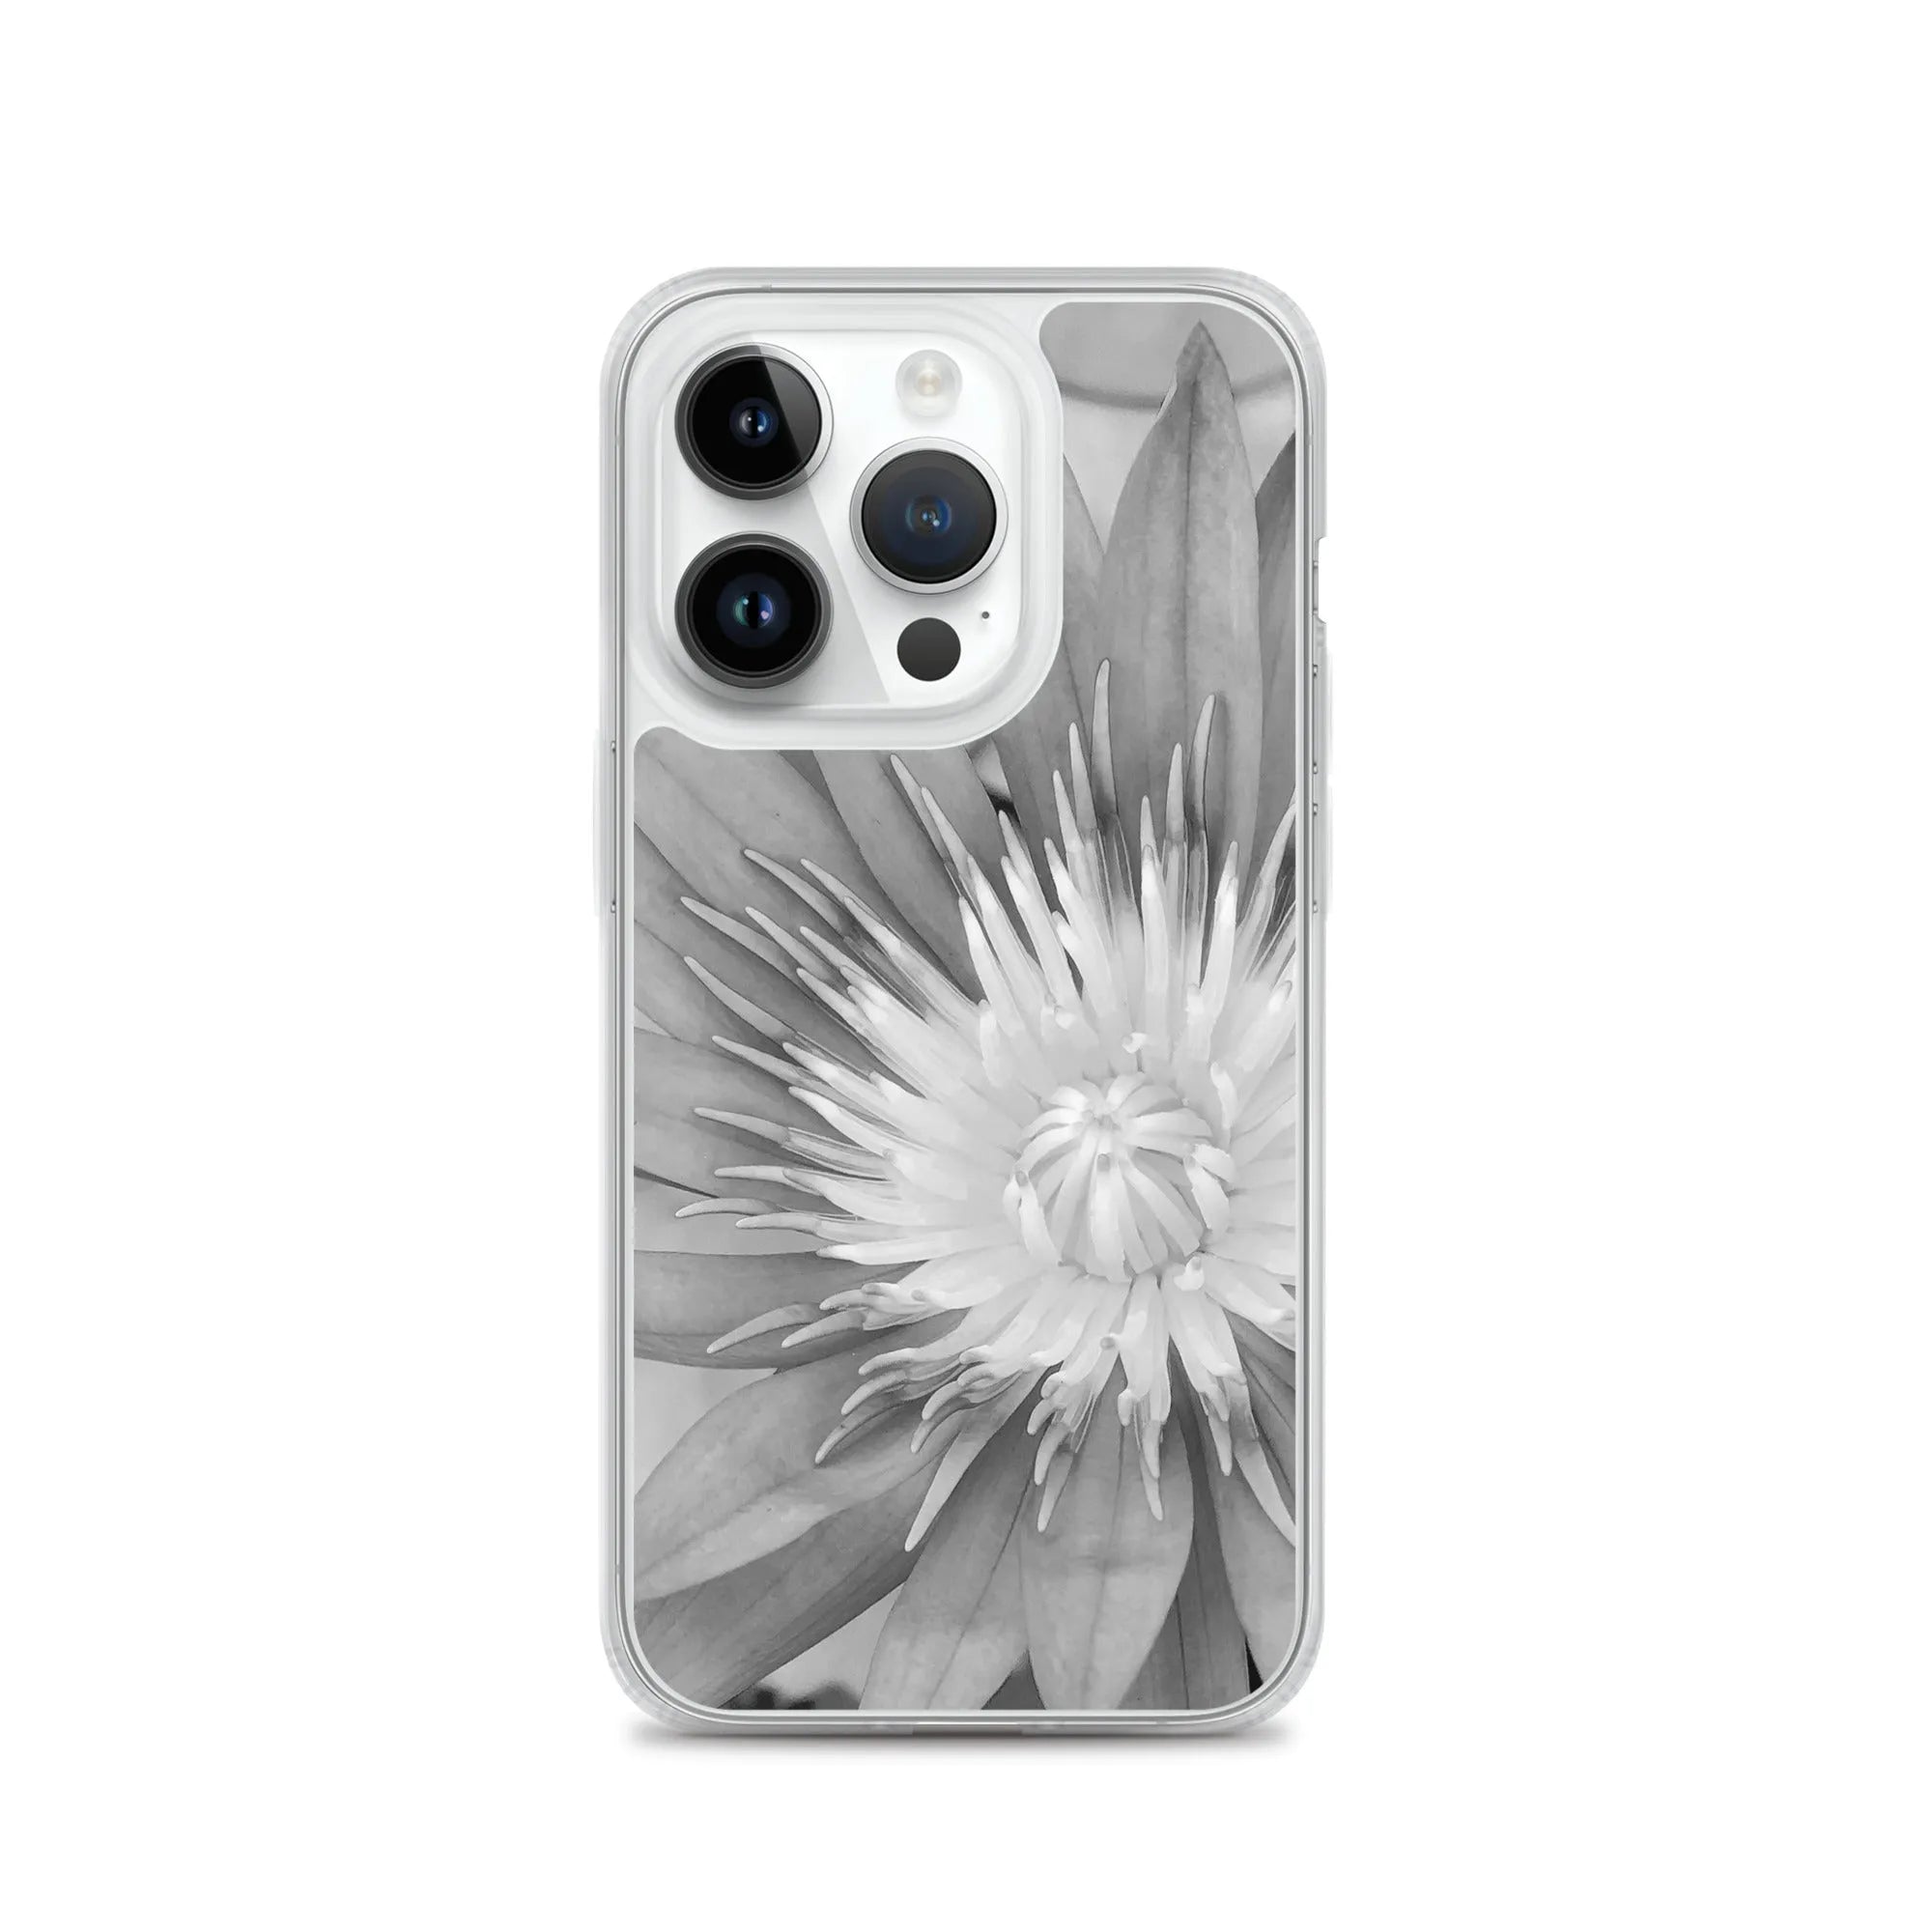 Lilliput Floral Iphone Case - Black And White - Iphone 14 Pro - Mobile Phone Cases - Aesthetic Art